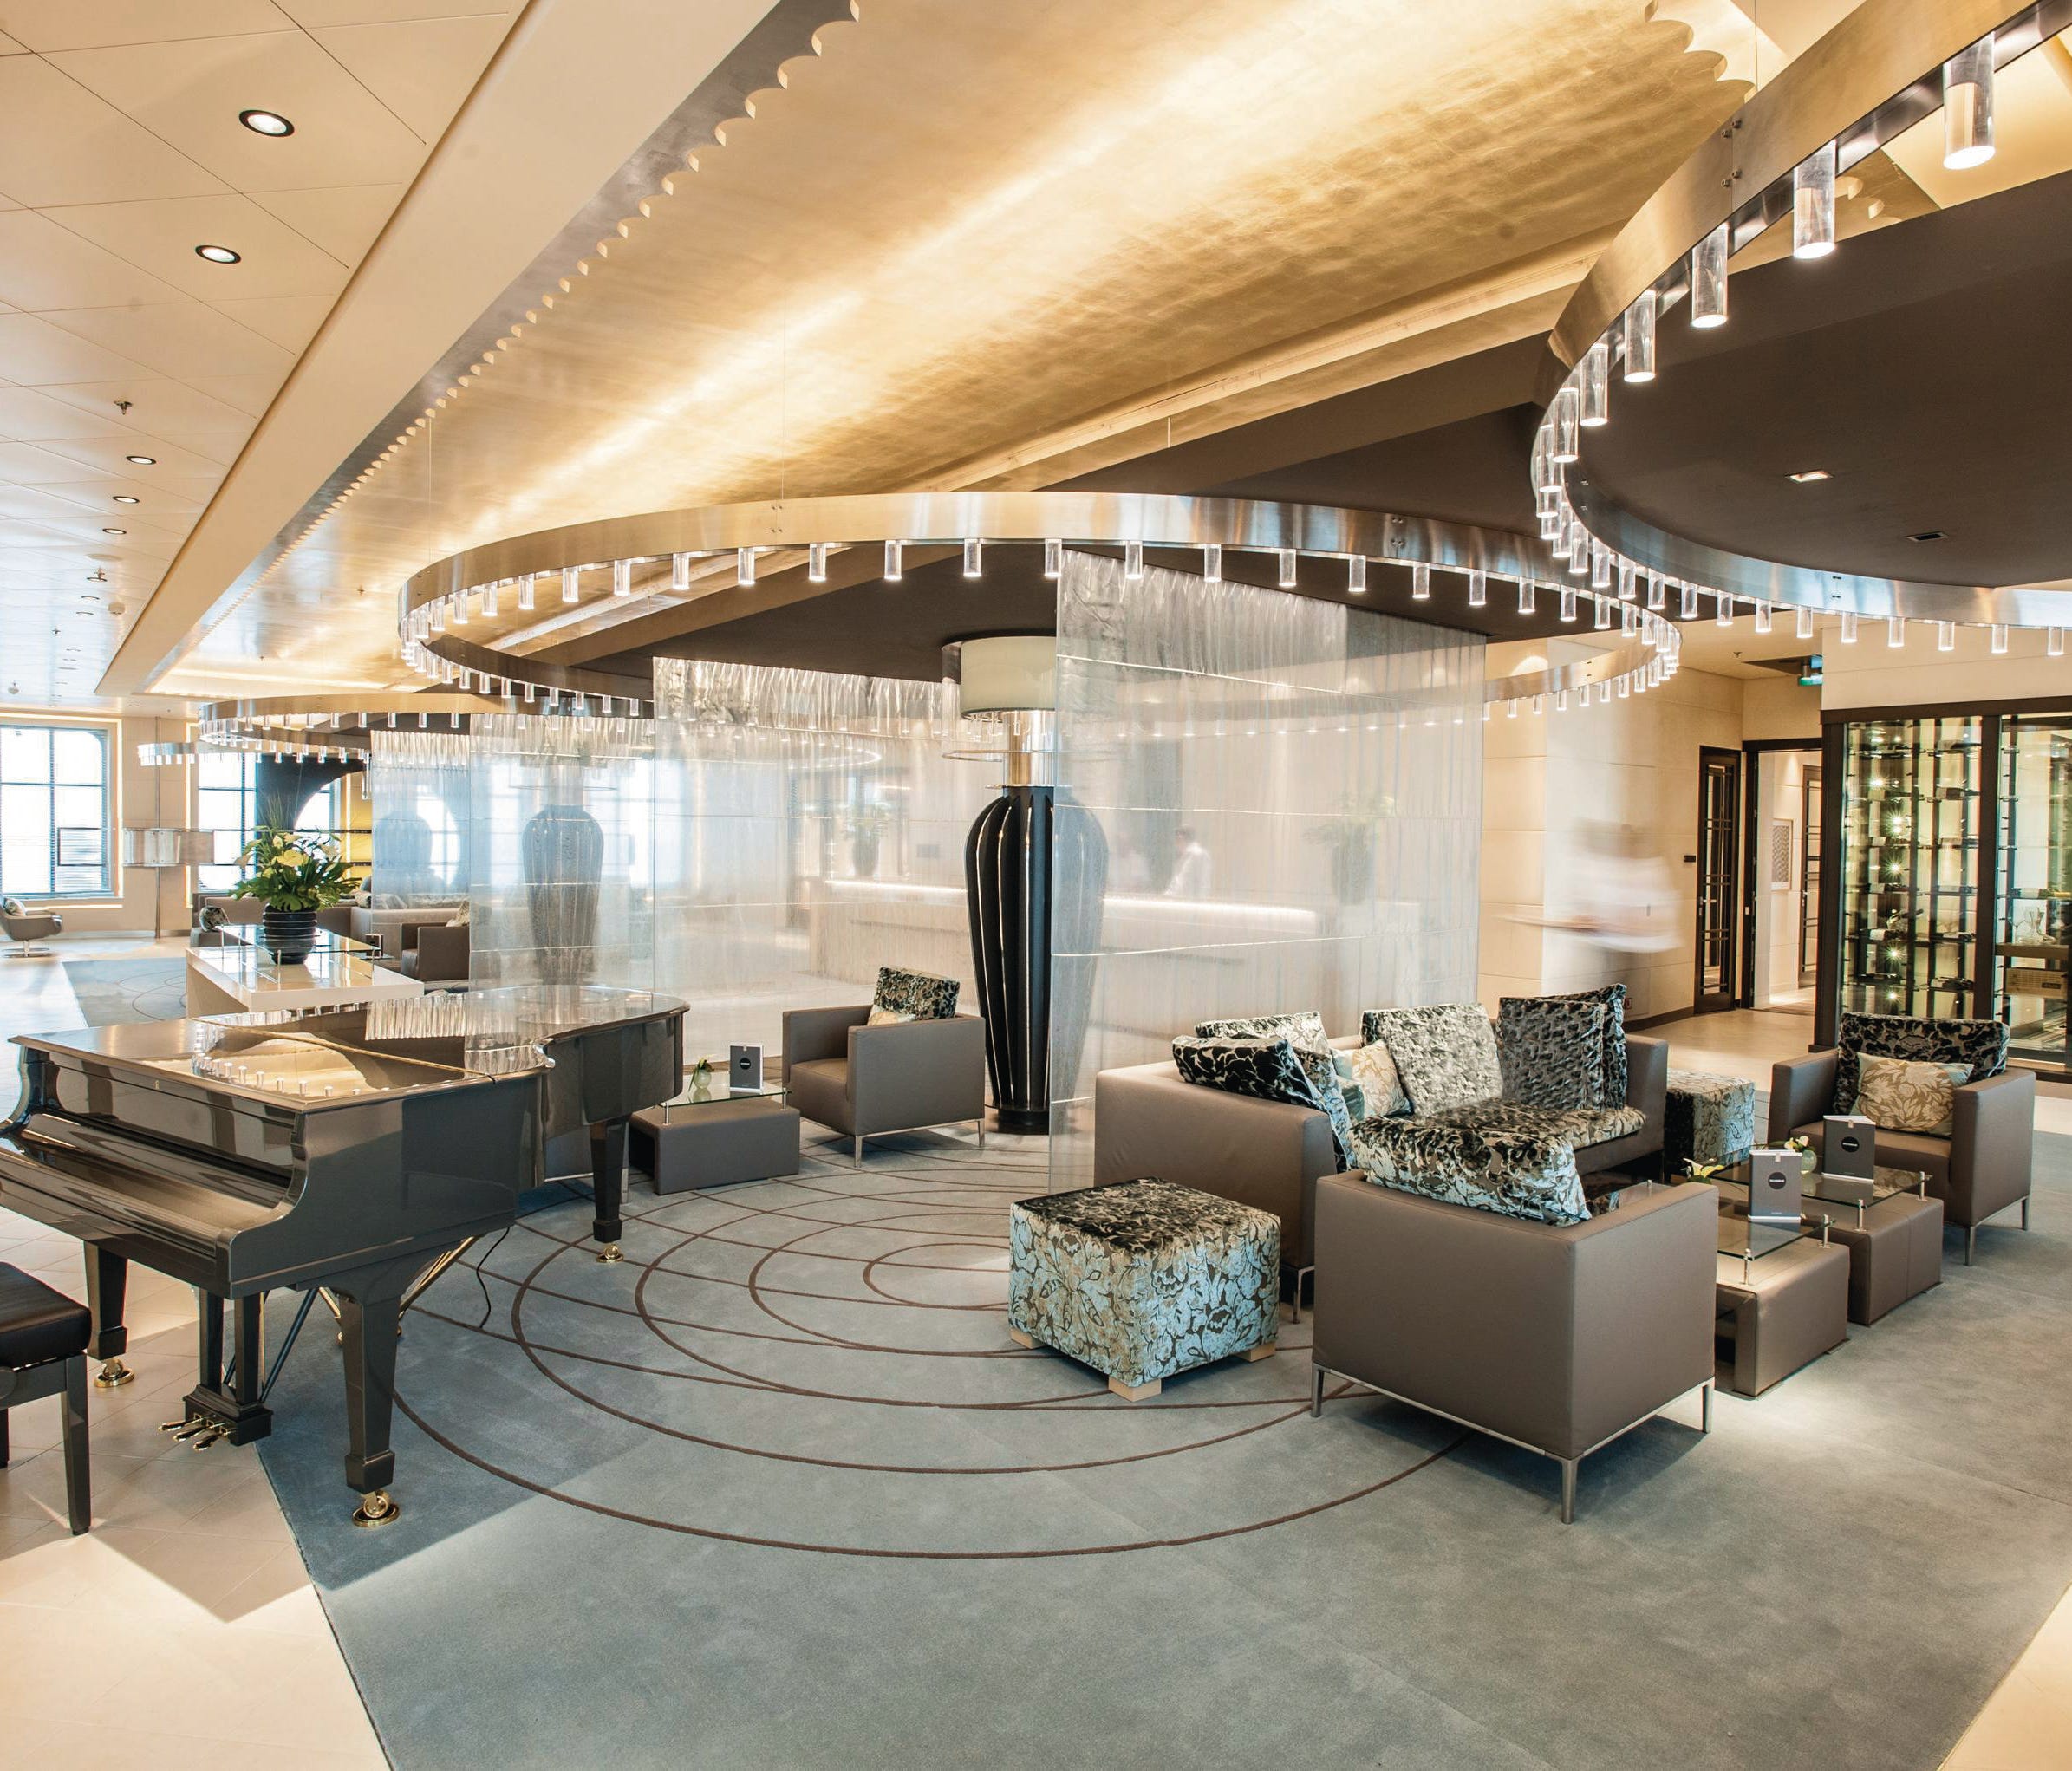 The reception area of Hapag-Lloyd Cruises' Europa 2 is spacious and elegant with high ceilings.